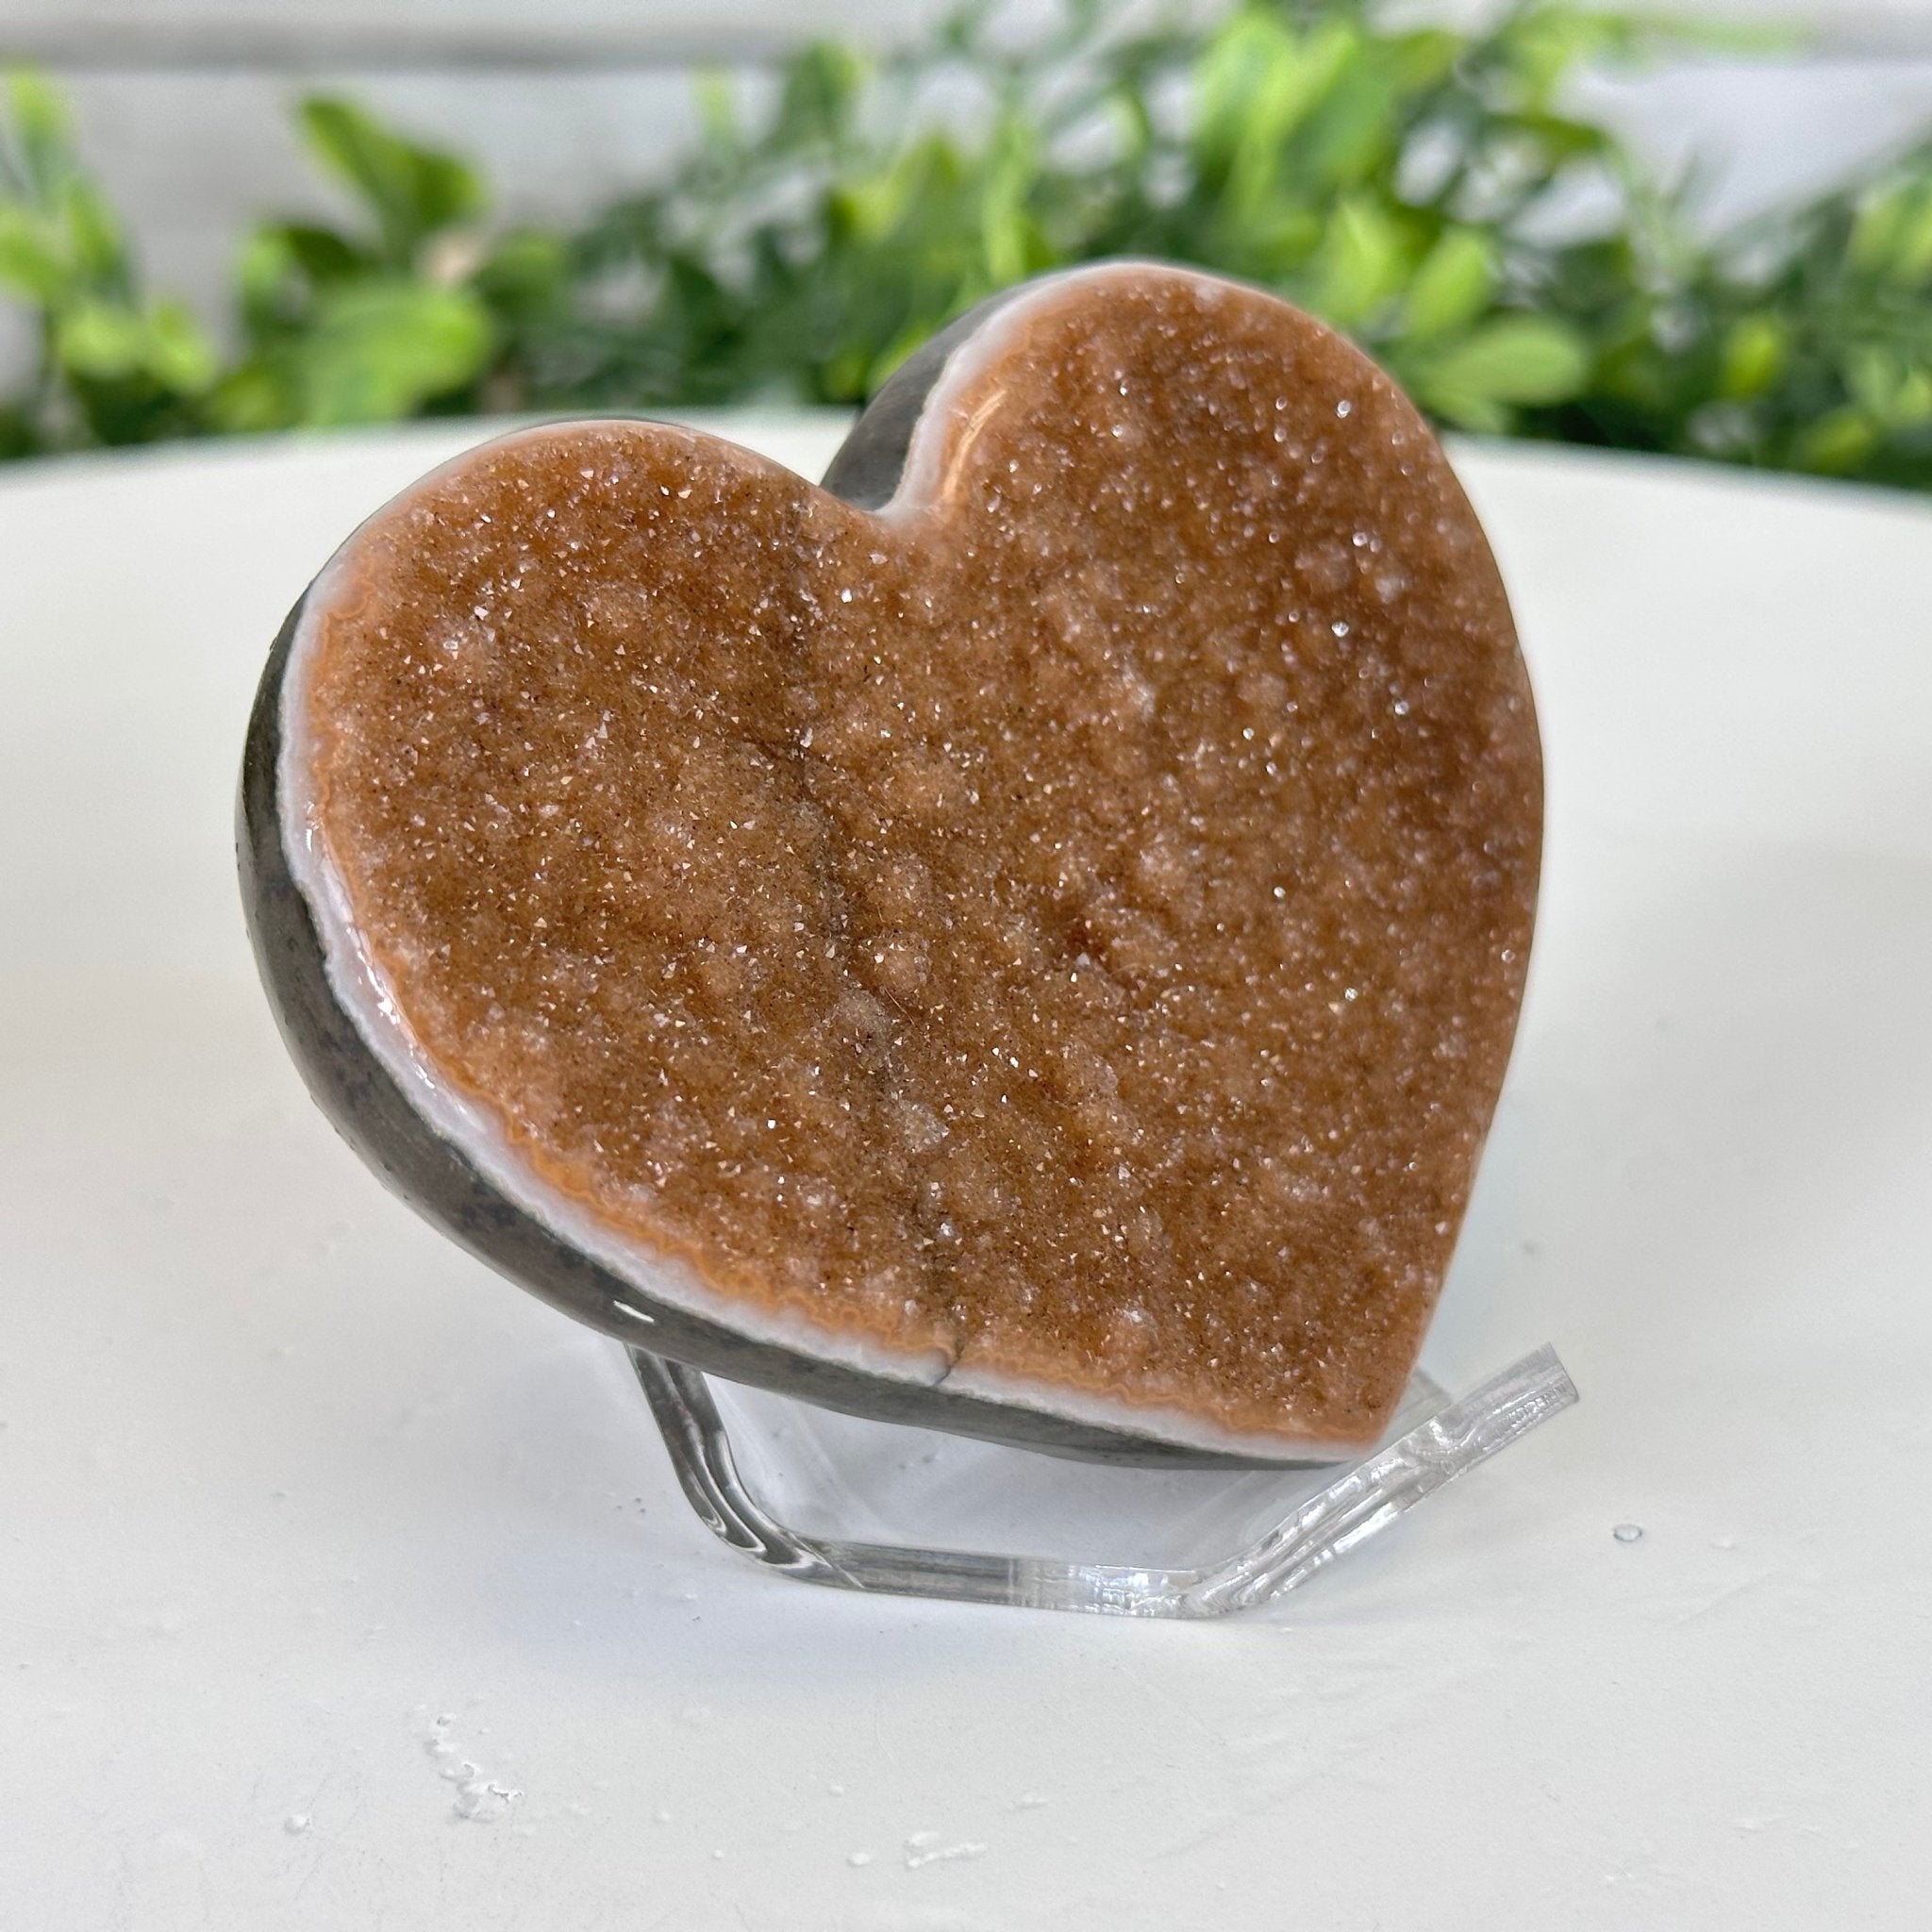 Extra Plus Quality Pink Amethyst Heart Geode on an Acrylic Stand, 0.37 lbs & 2.25" Tall #5462-0082 by Brazil Gems - Brazil GemsBrazil GemsExtra Plus Quality Pink Amethyst Heart Geode on an Acrylic Stand, 0.37 lbs & 2.25" Tall #5462-0082 by Brazil GemsHearts5462-0082